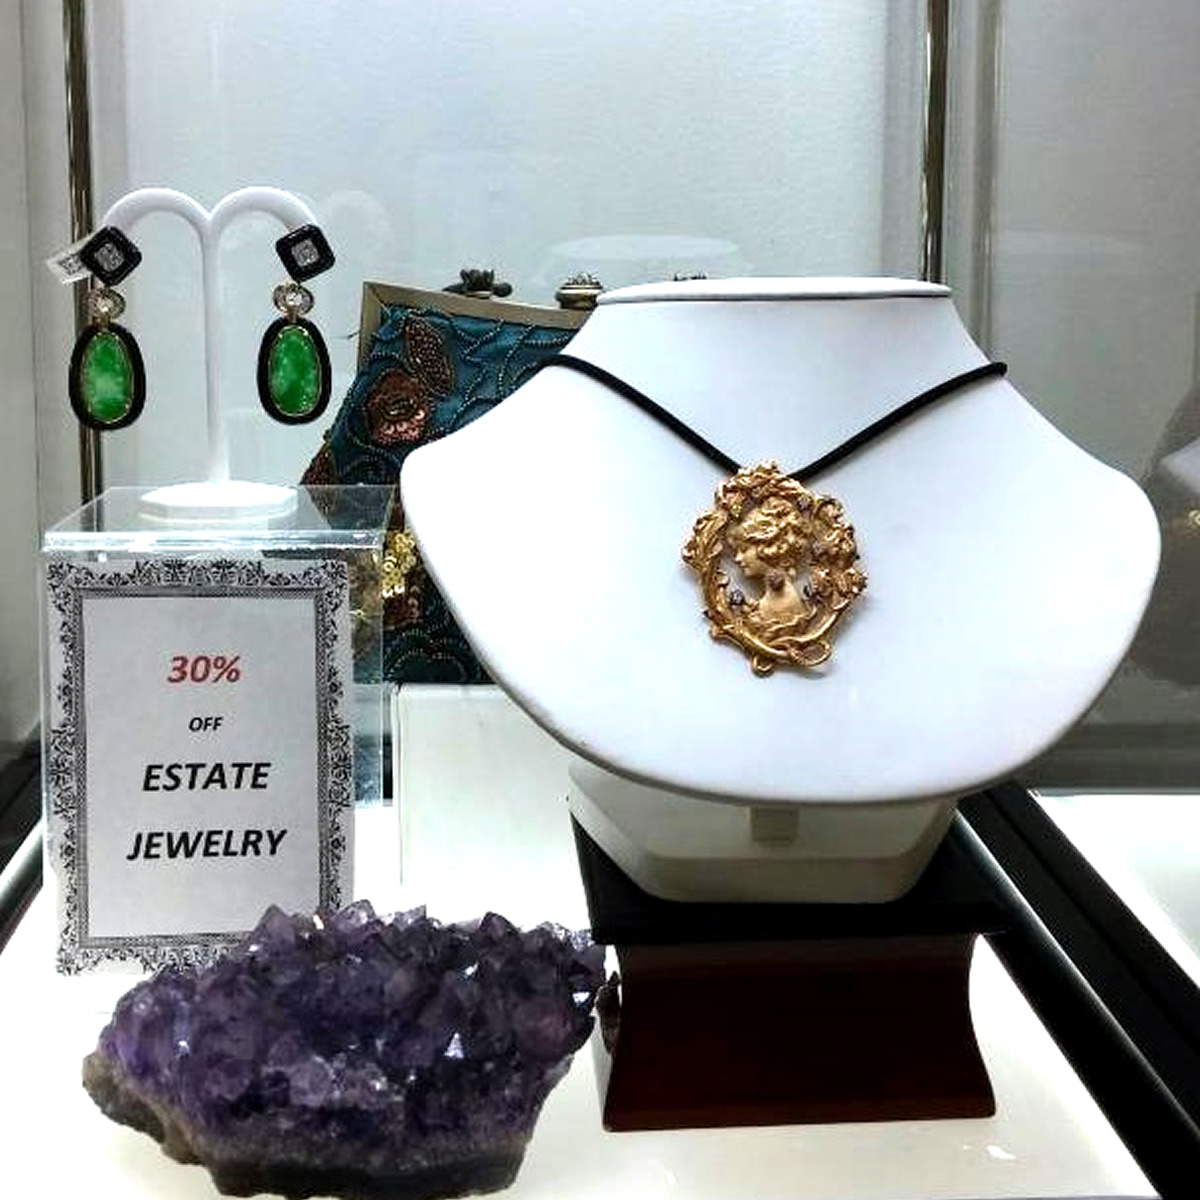 Wide selection of Estate Jewelry on display